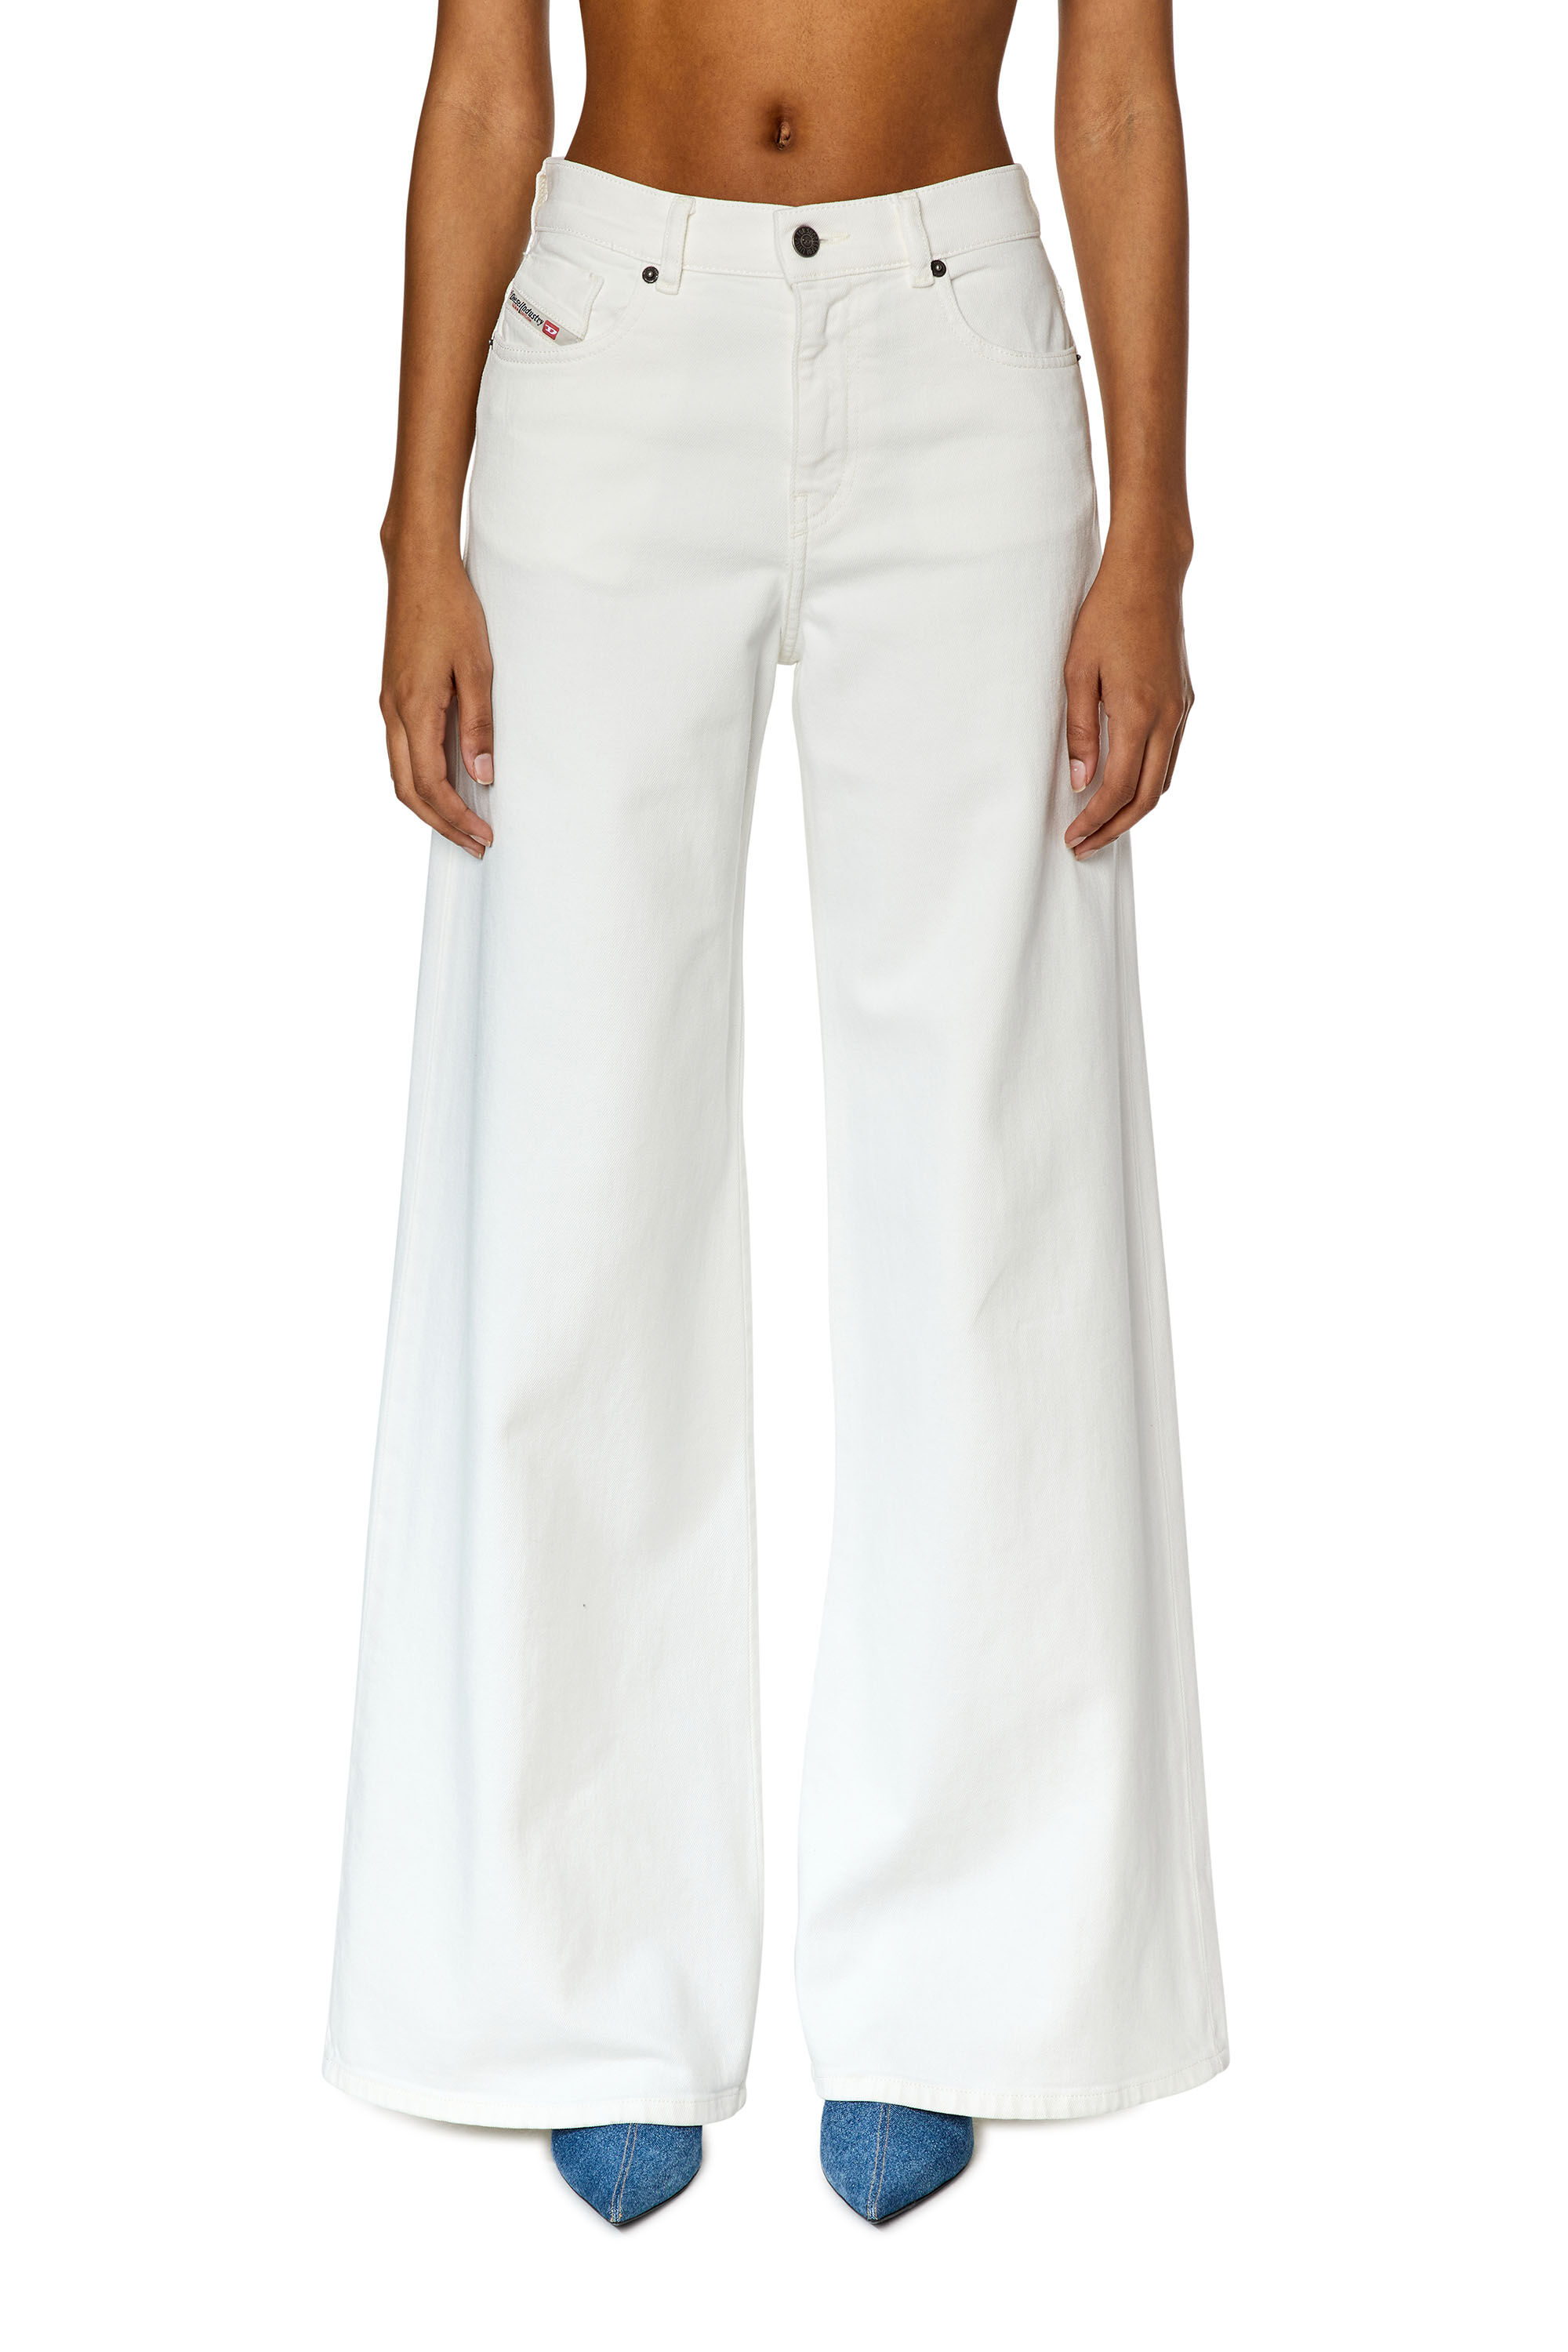 1978 Woman: bootcutandflare White Jeans